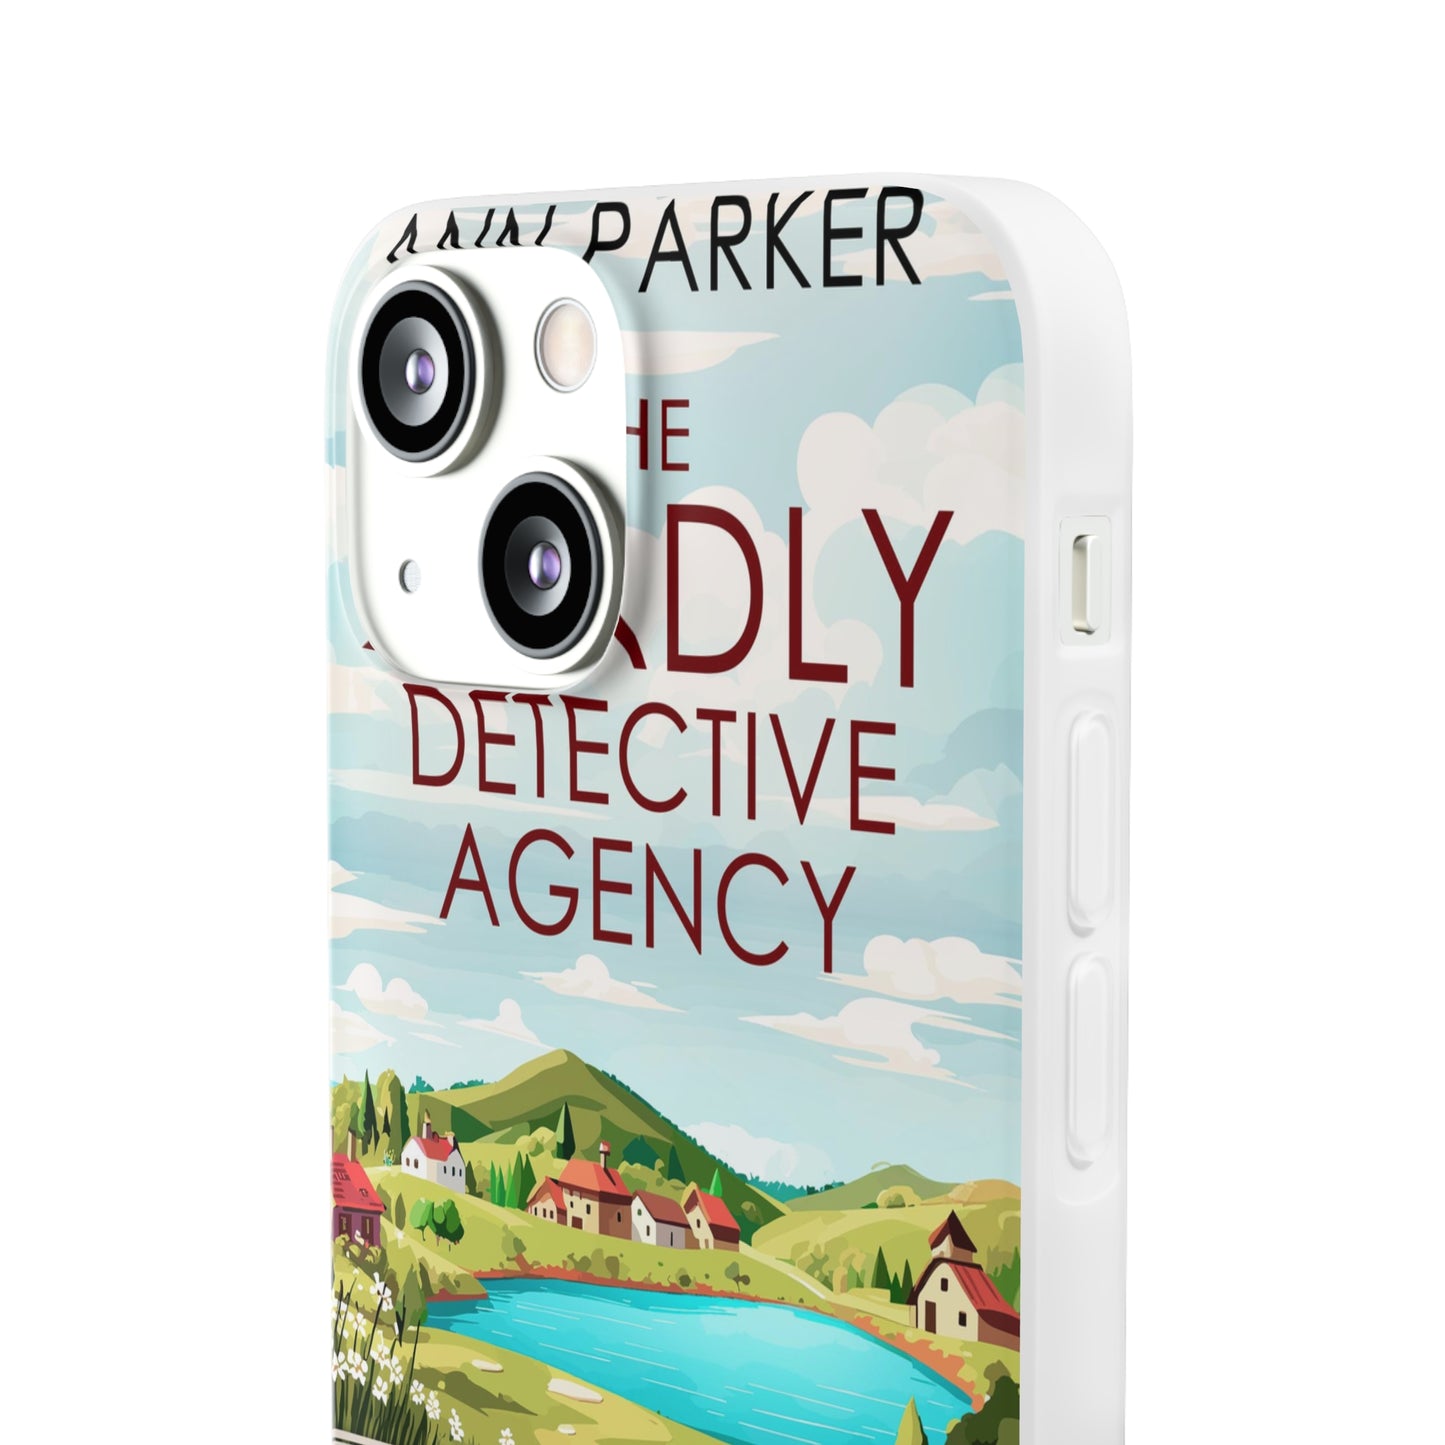 The Deadly Detective Agency - Flexible Phone Case